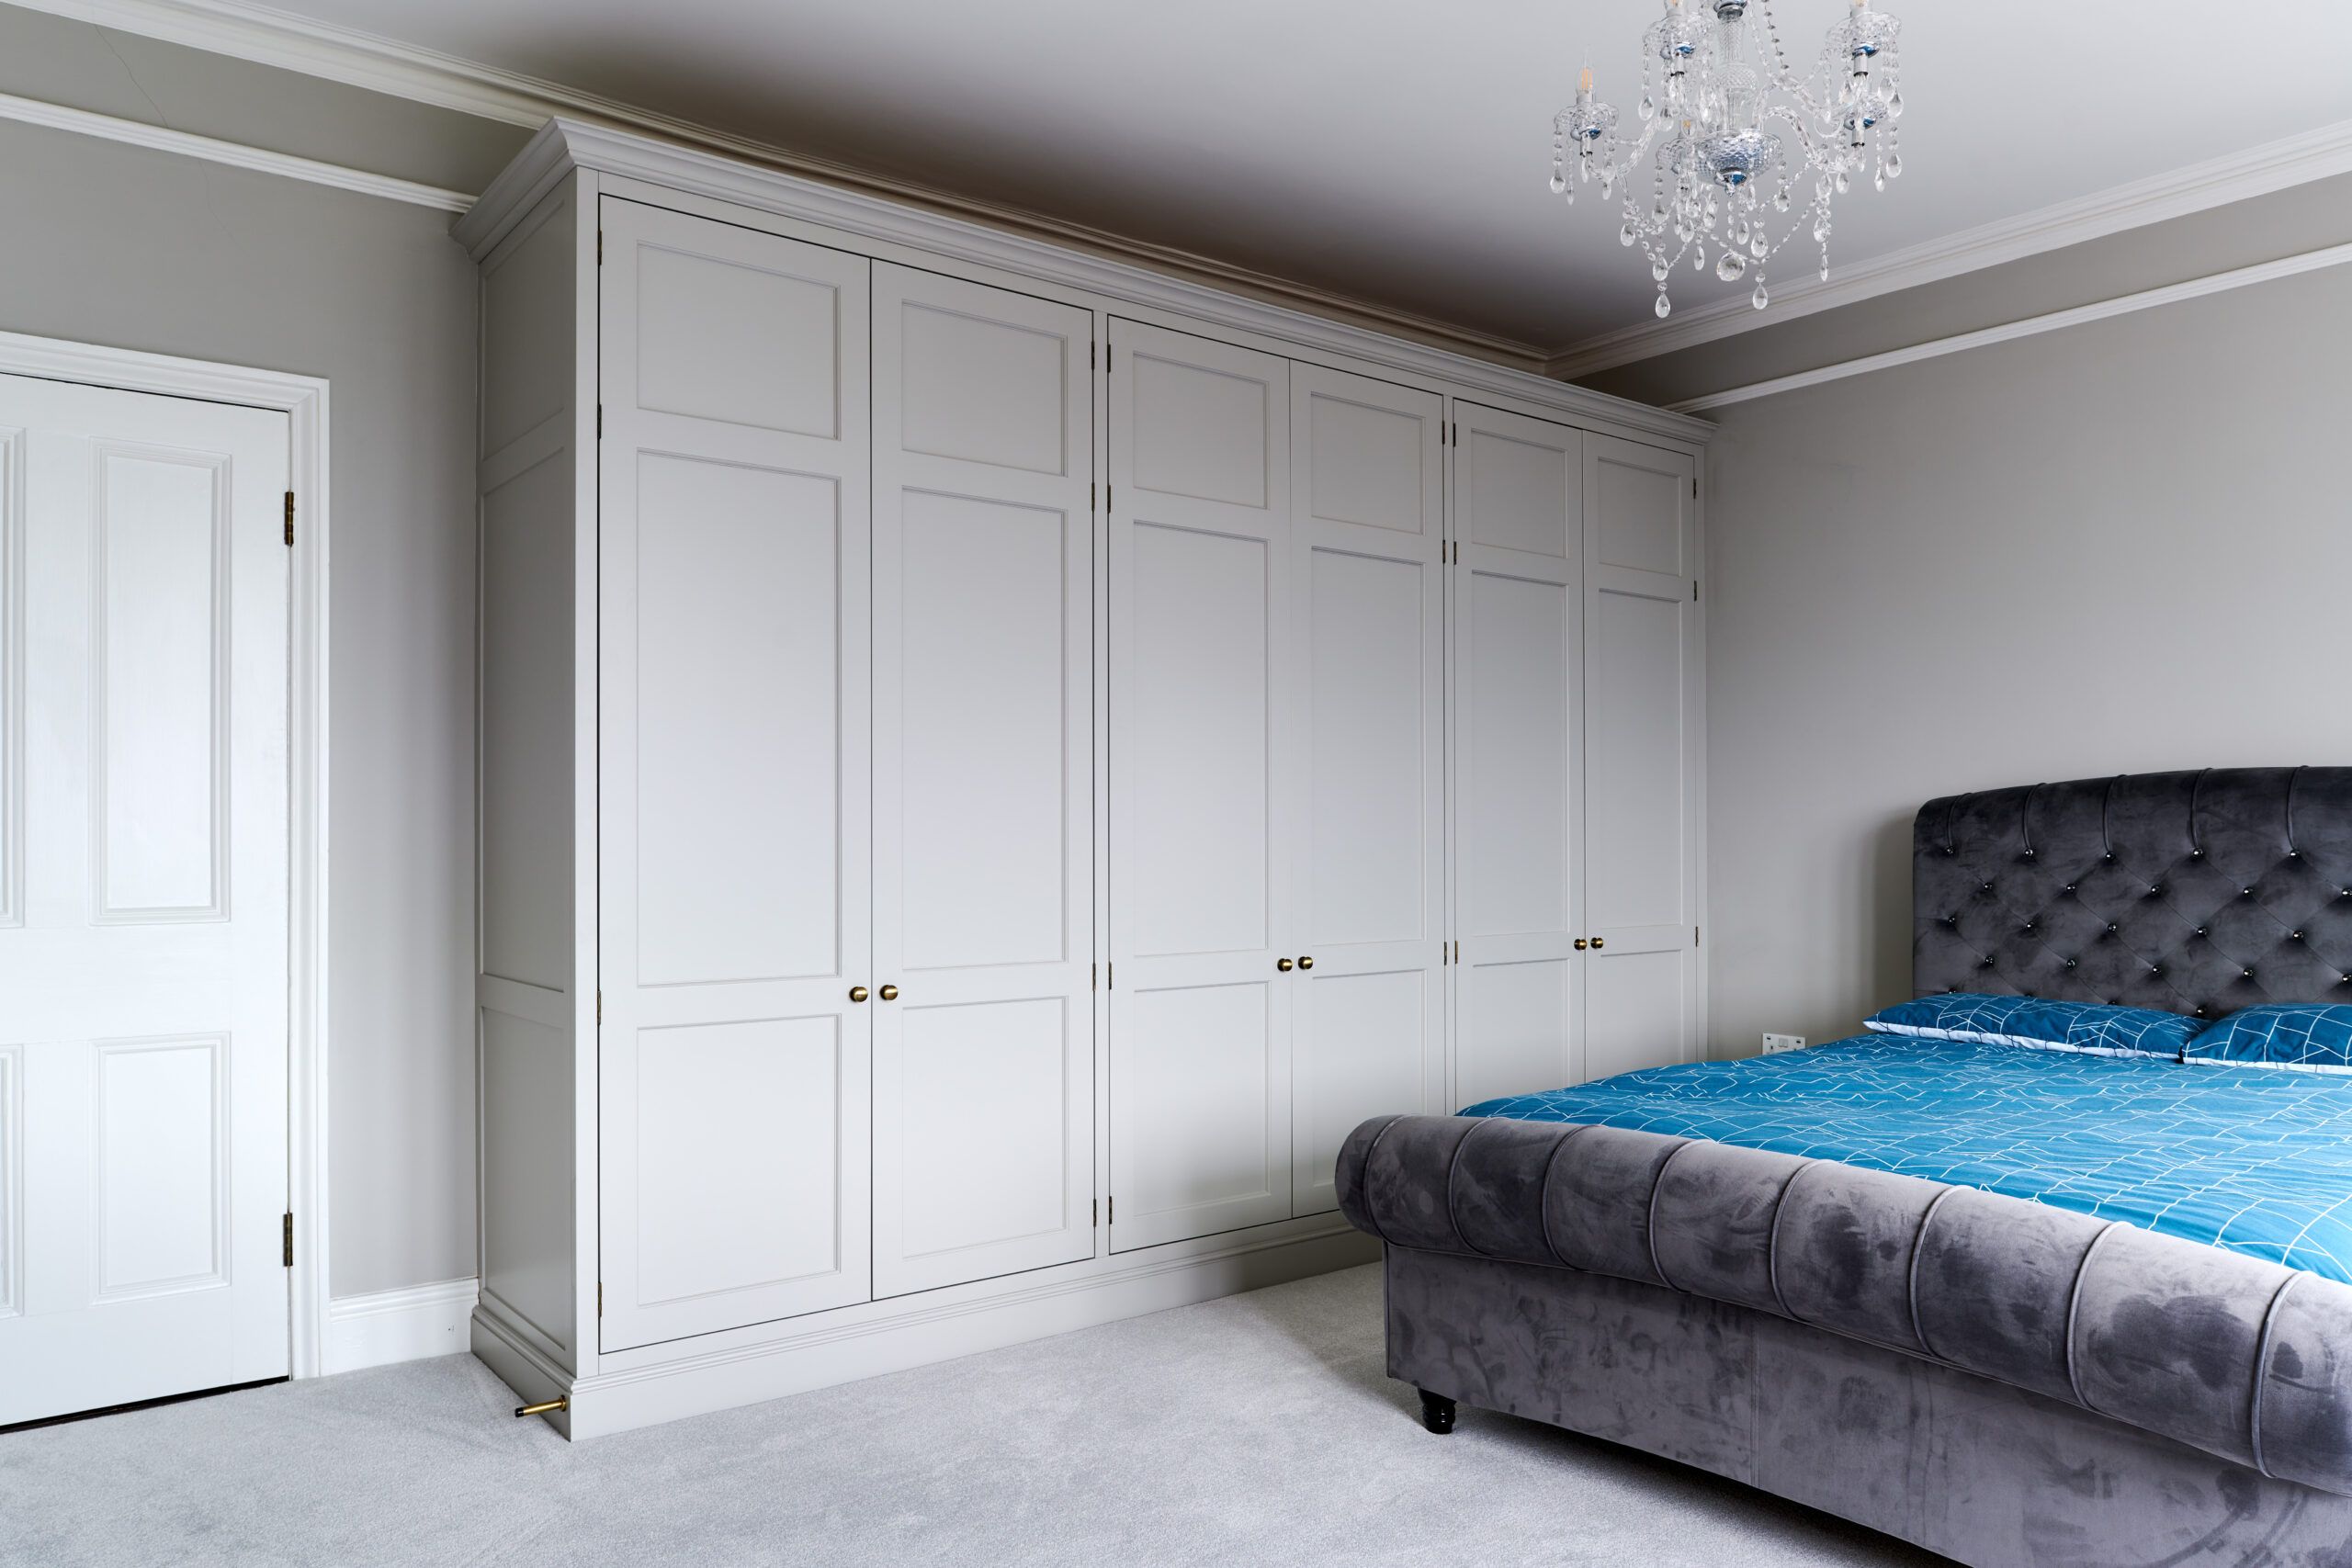 Fitted Or Freestanding Bespoke Wardrobes | Bath Bespoke In Built In Wardrobes (View 9 of 15)